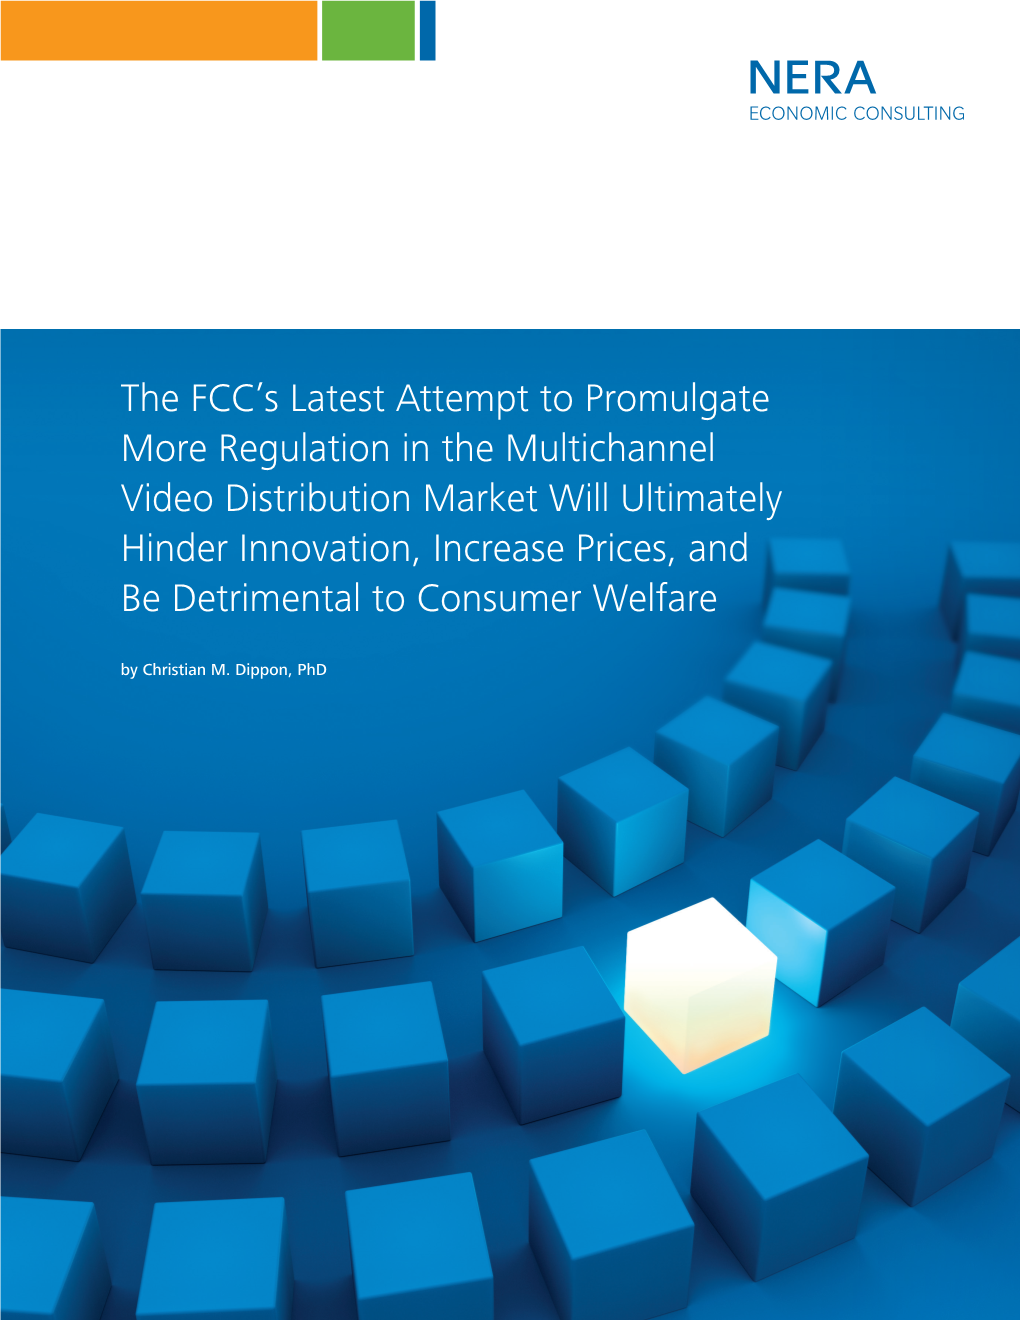 The FCC's Latest Attempt to Promulgate More Regulation in the Multichannel Video Distribution Market Will Ultimately Hinder In